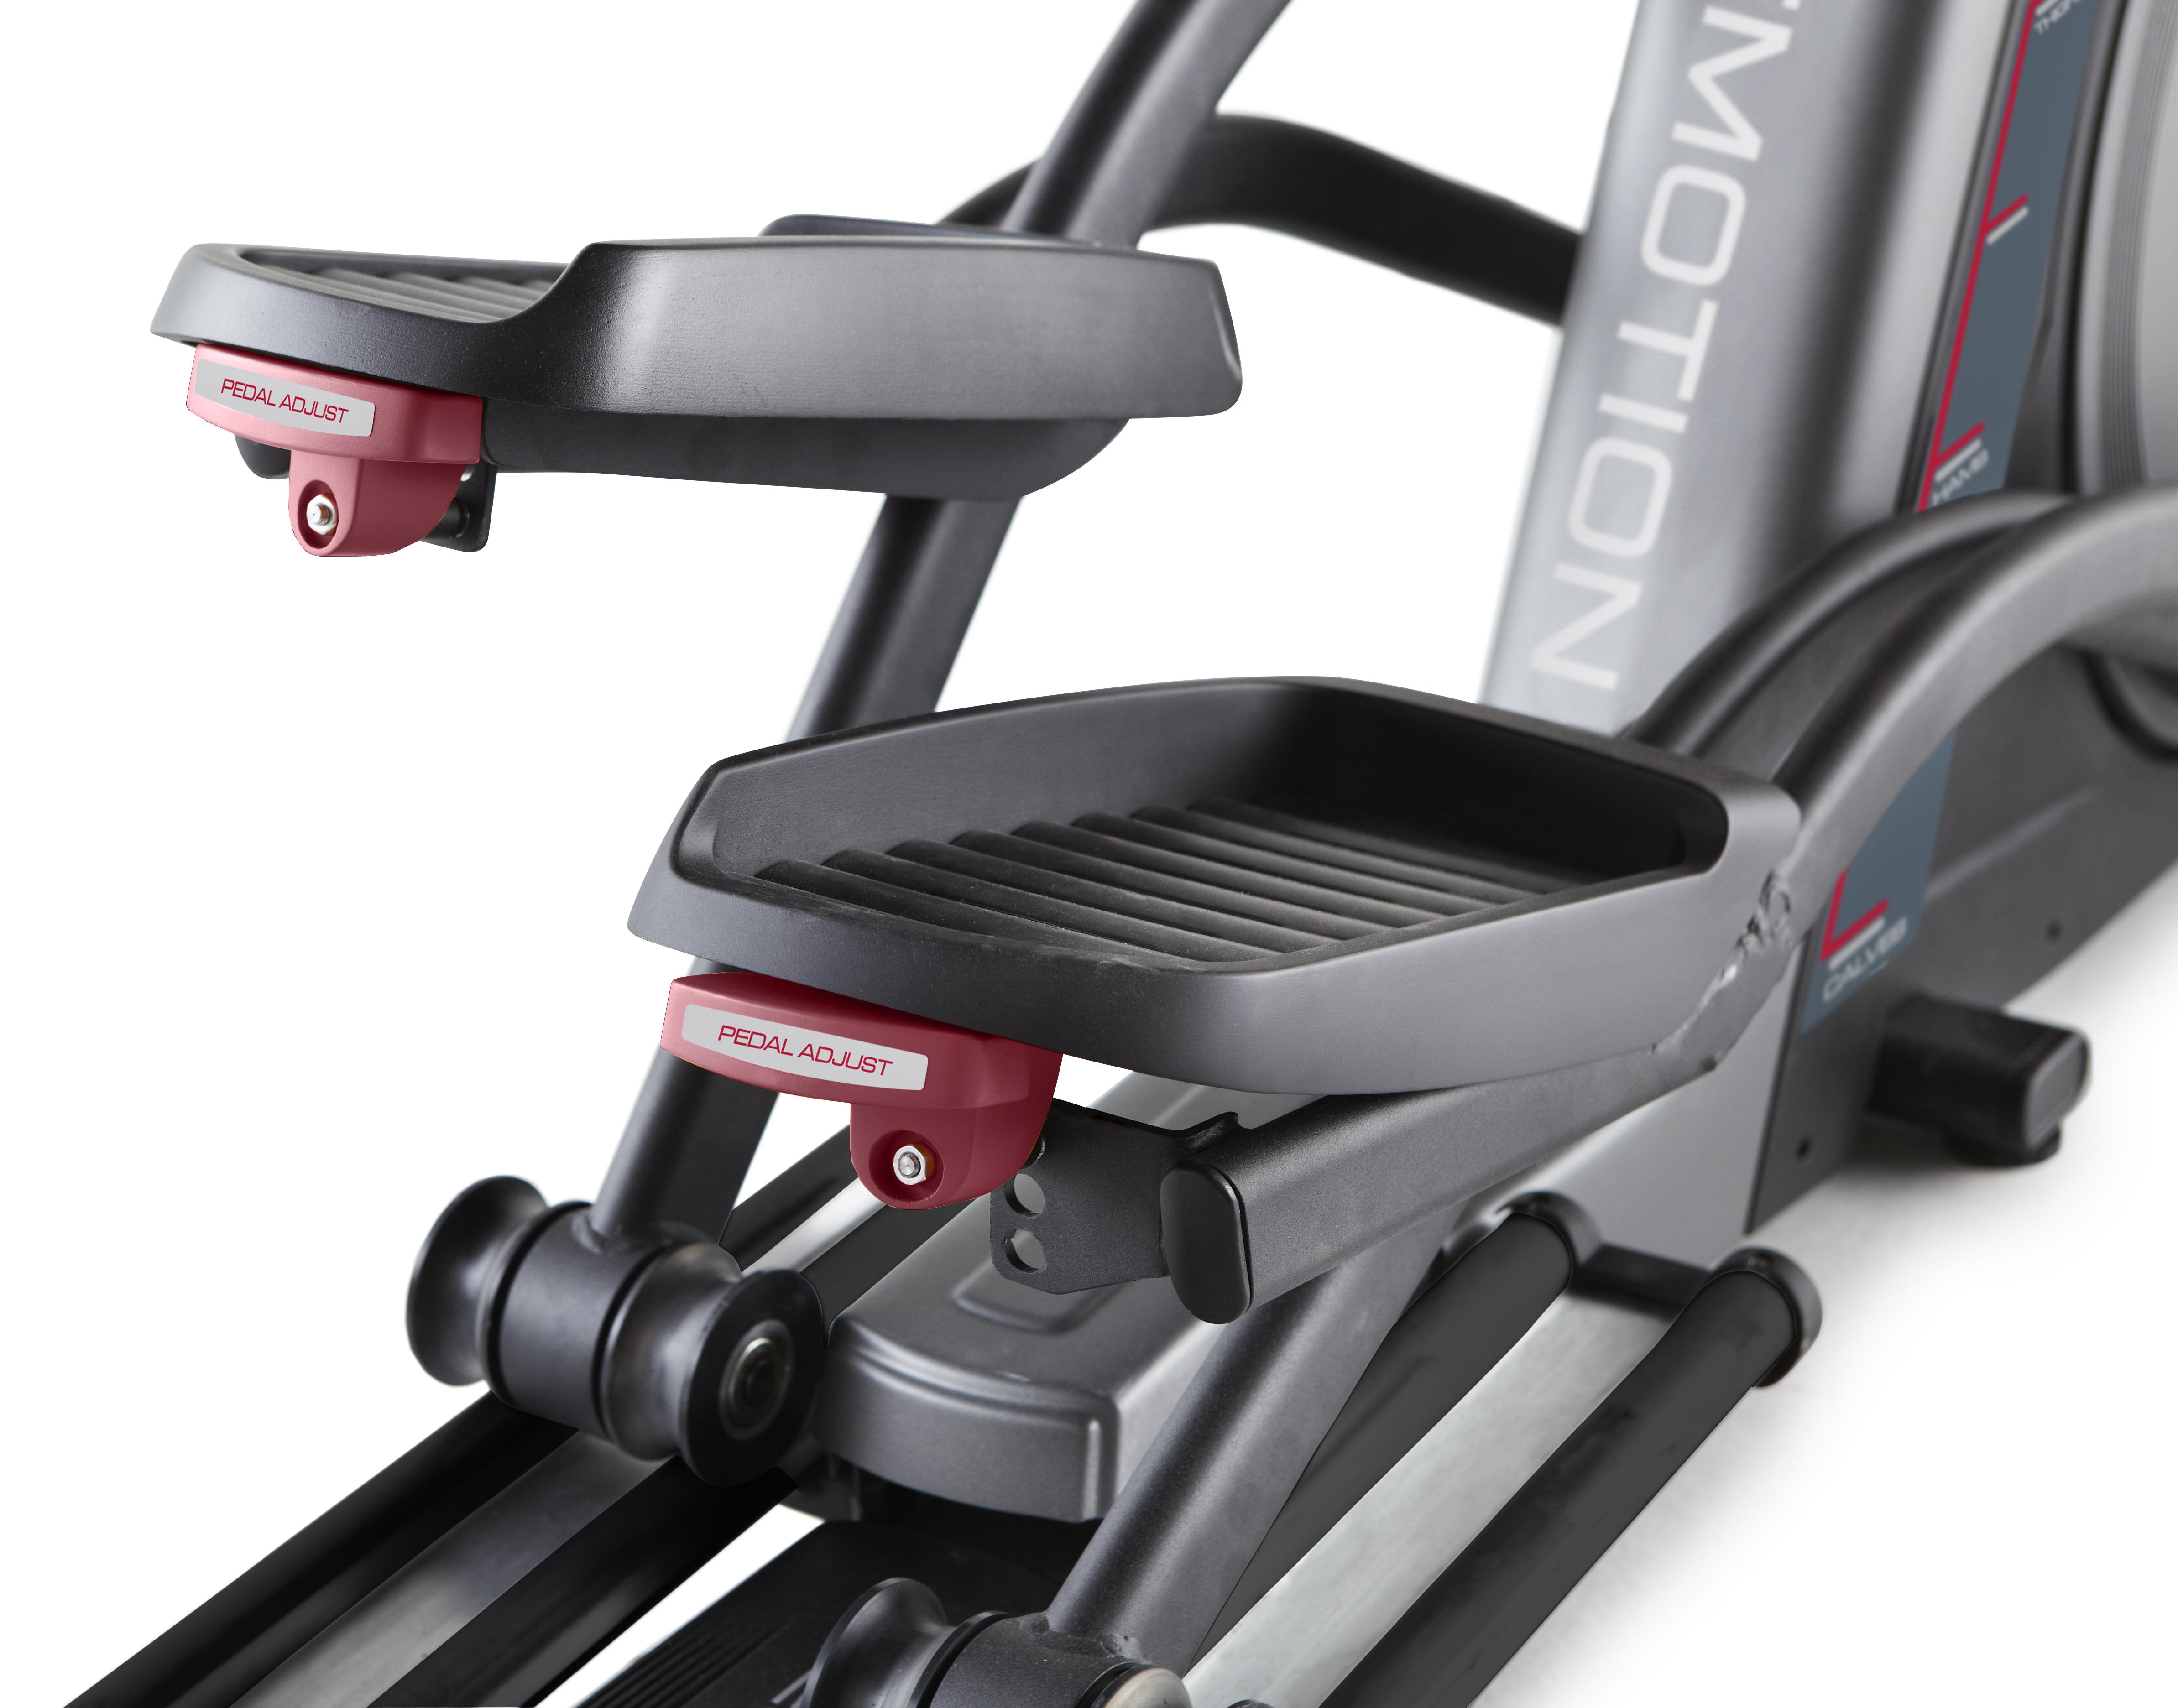 Freemotion 645 Commercial Grade Elliptical with Adjustable Incline - image 2 of 6